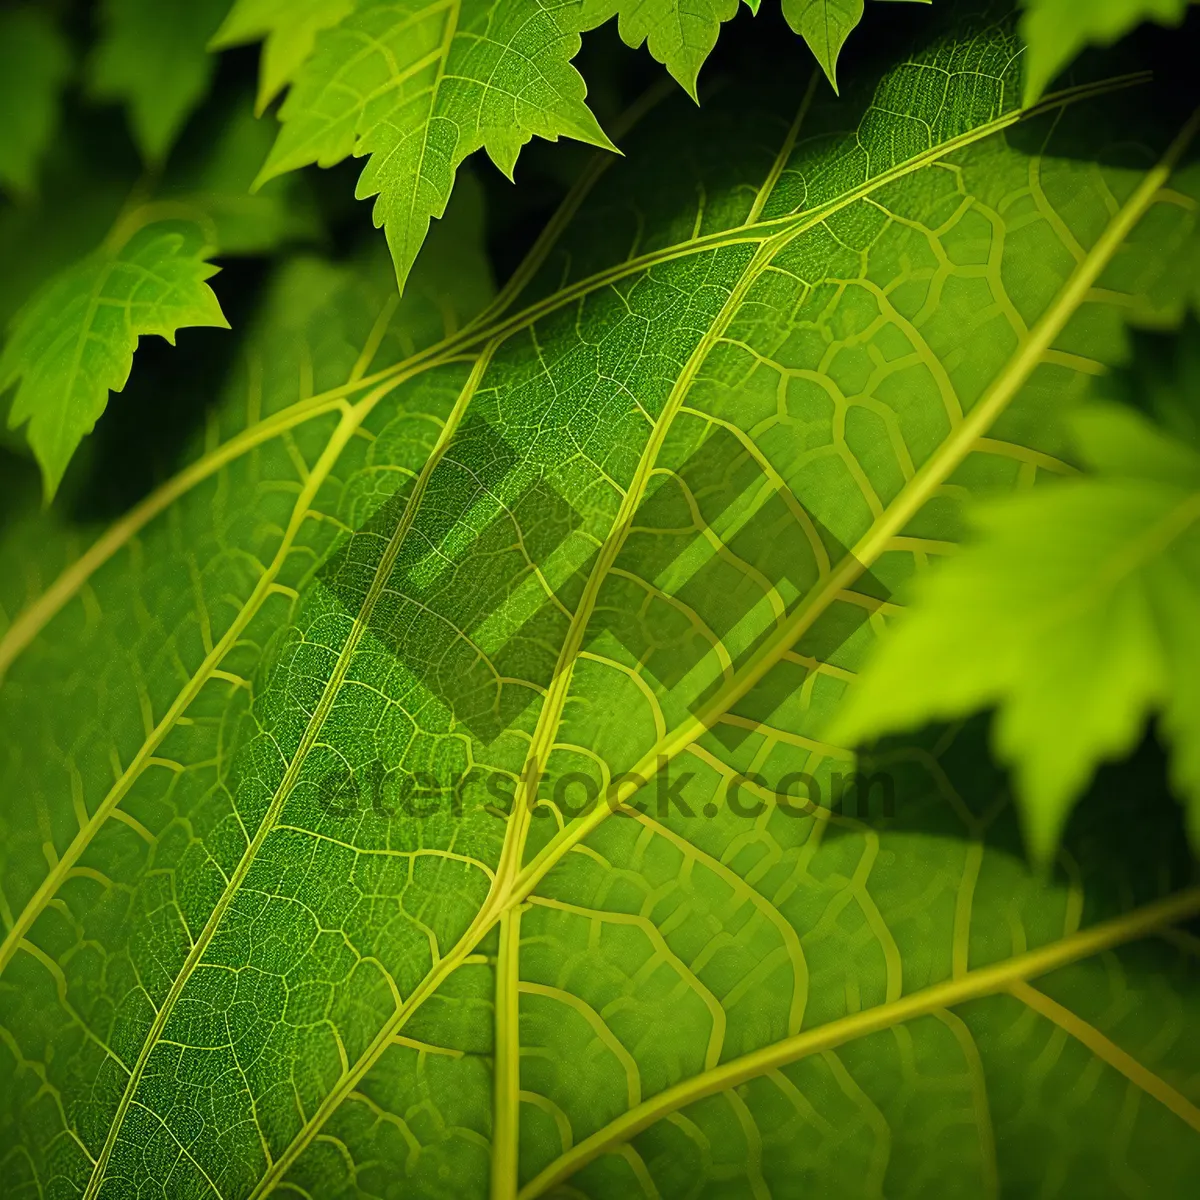 Picture of Vibrant Maple Leaf in Sunlit Forest